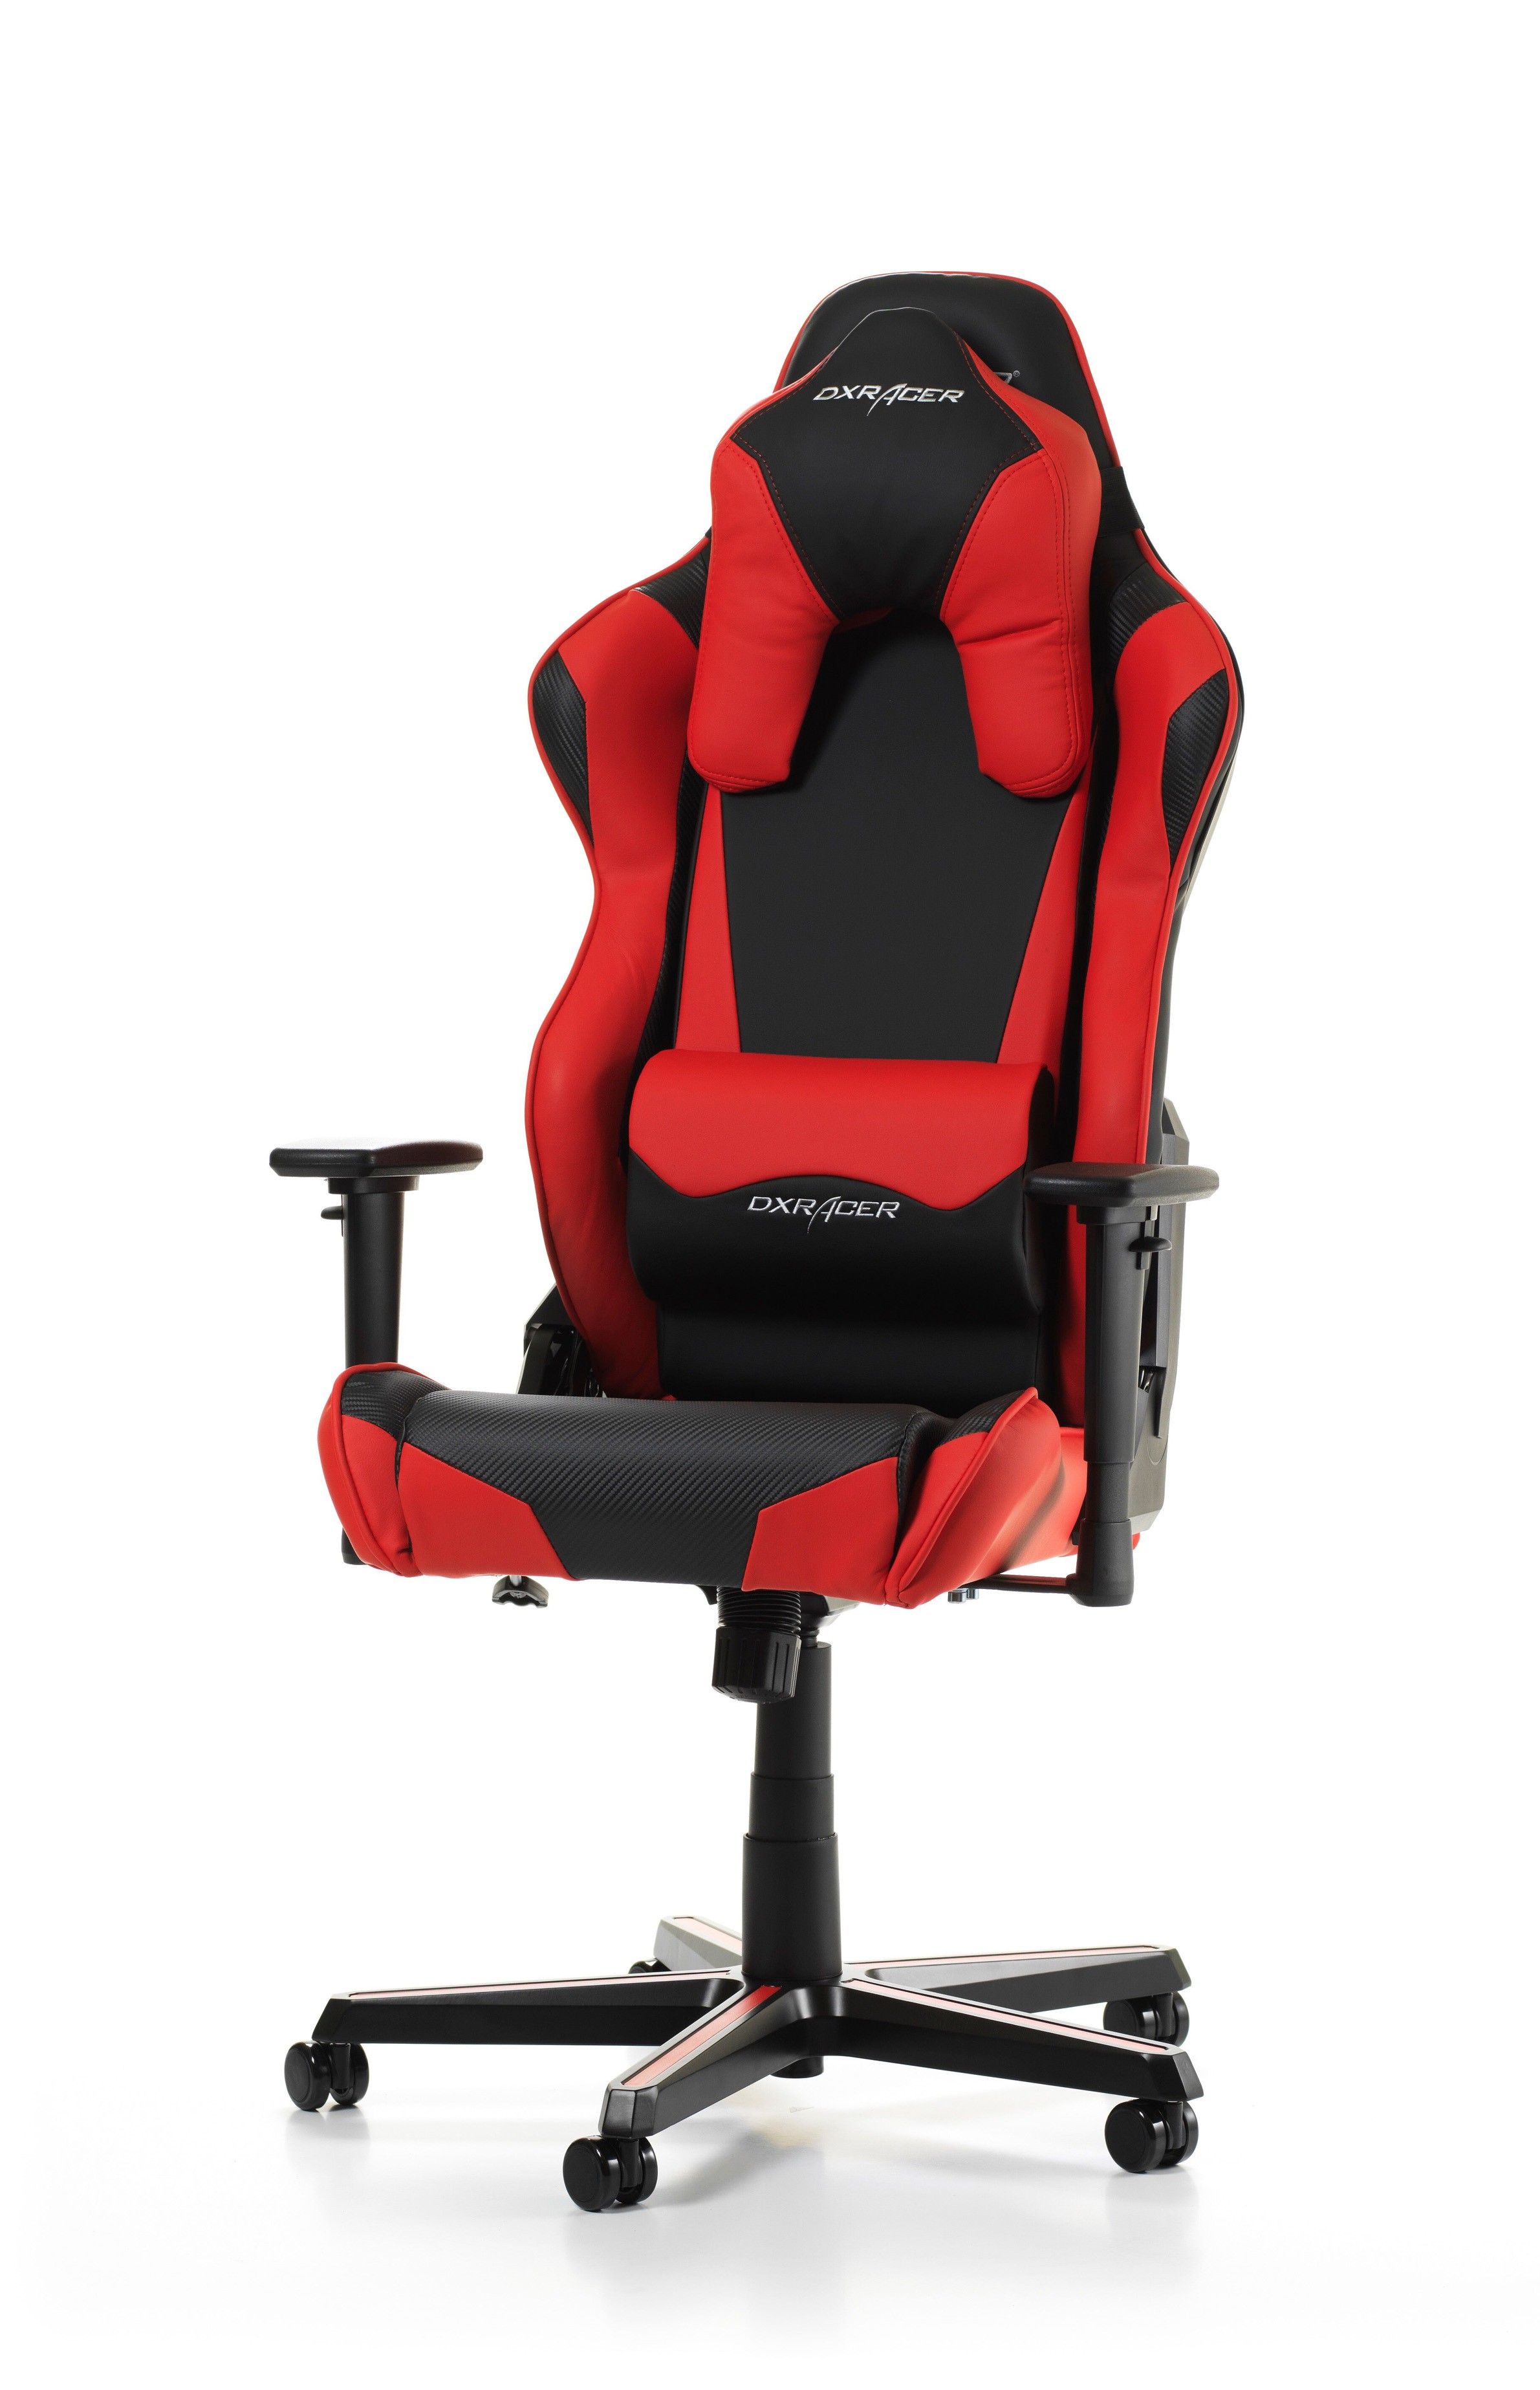 DXRACER RACING SHIELD SERIES R1-NR RED GAMING CHAIR